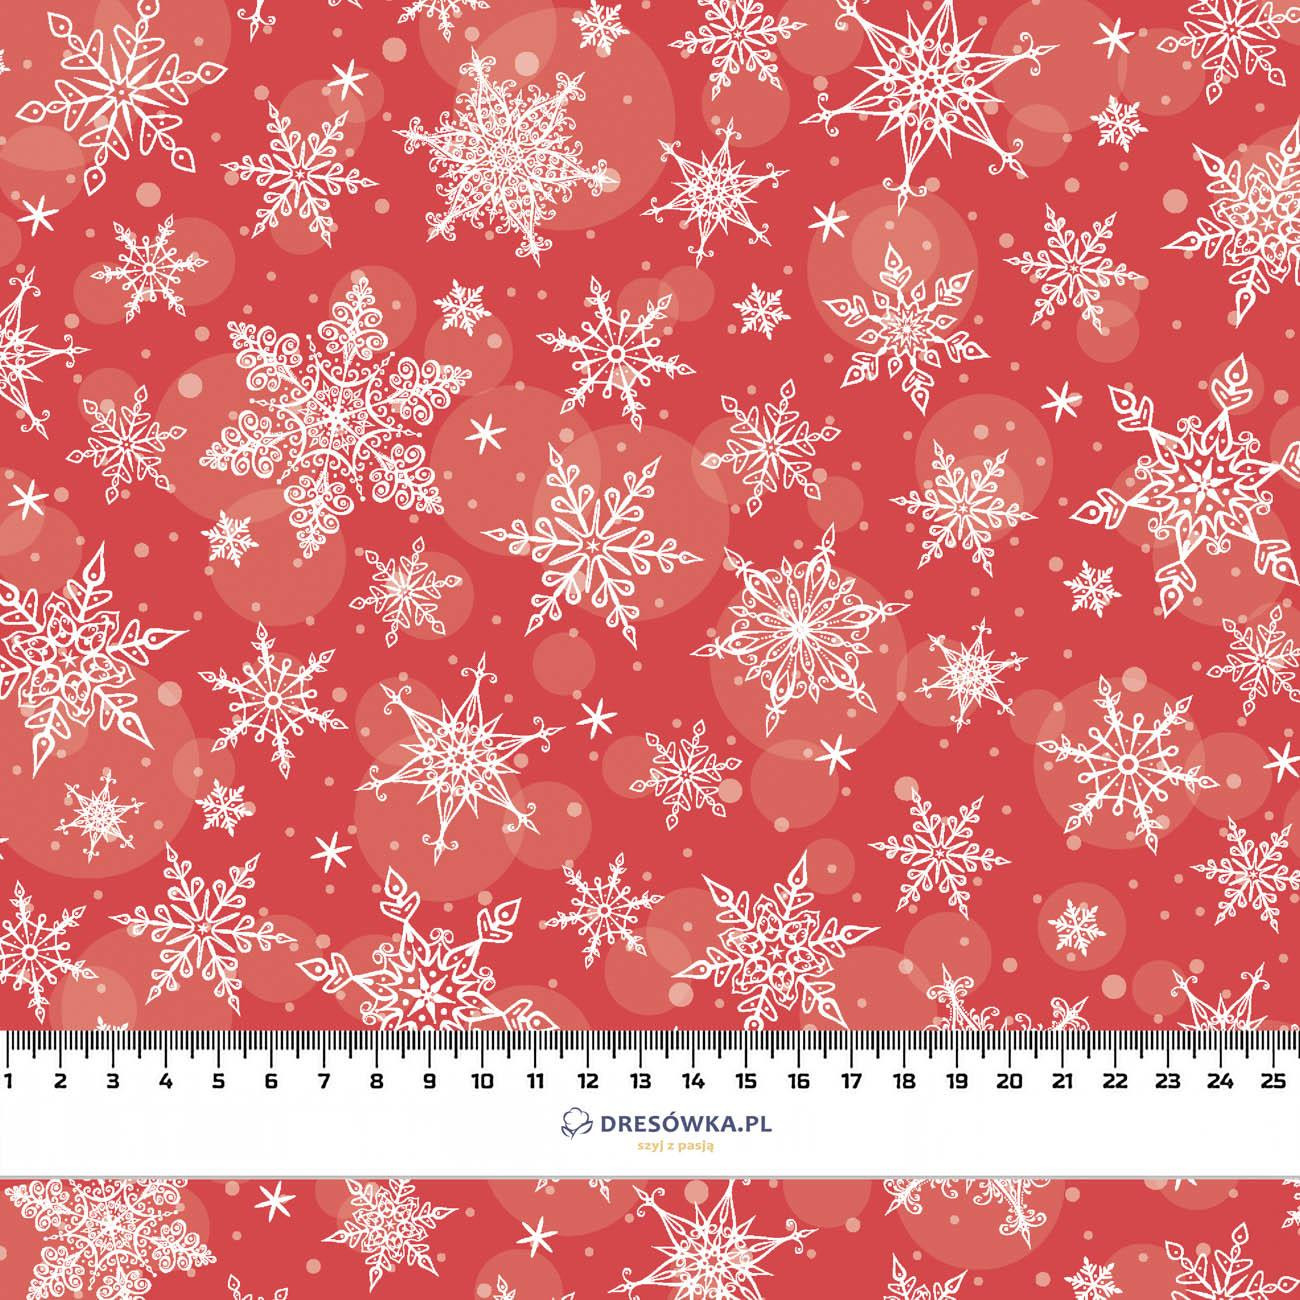 SNOWFLAKES PAT. 2 / red  - Waterproof woven fabric